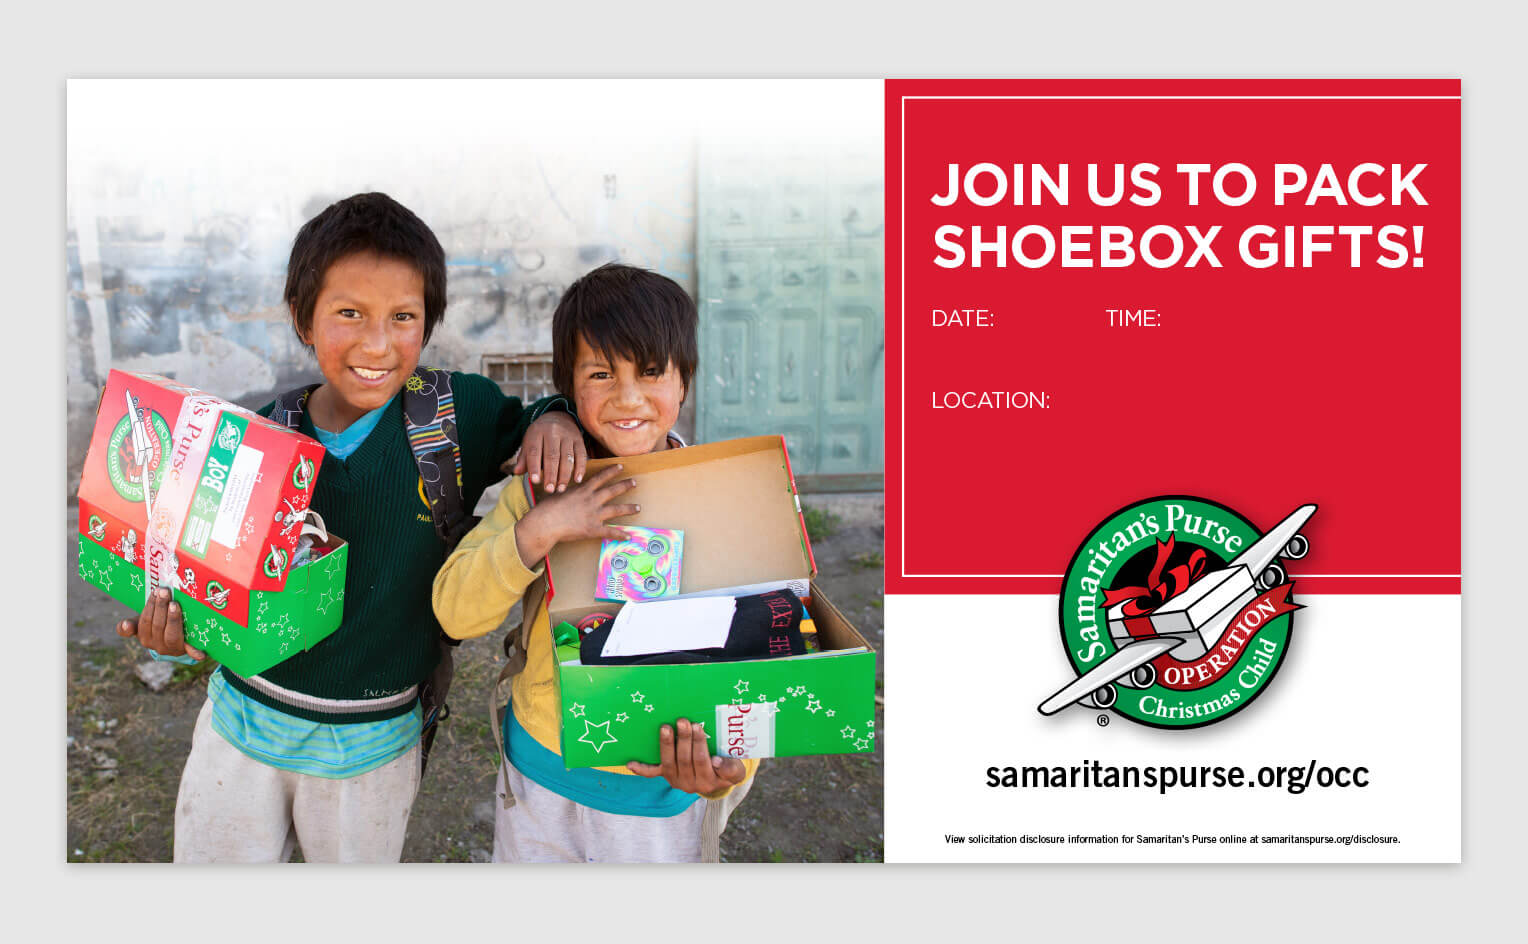 Order Free Operation Christmas Child Materials